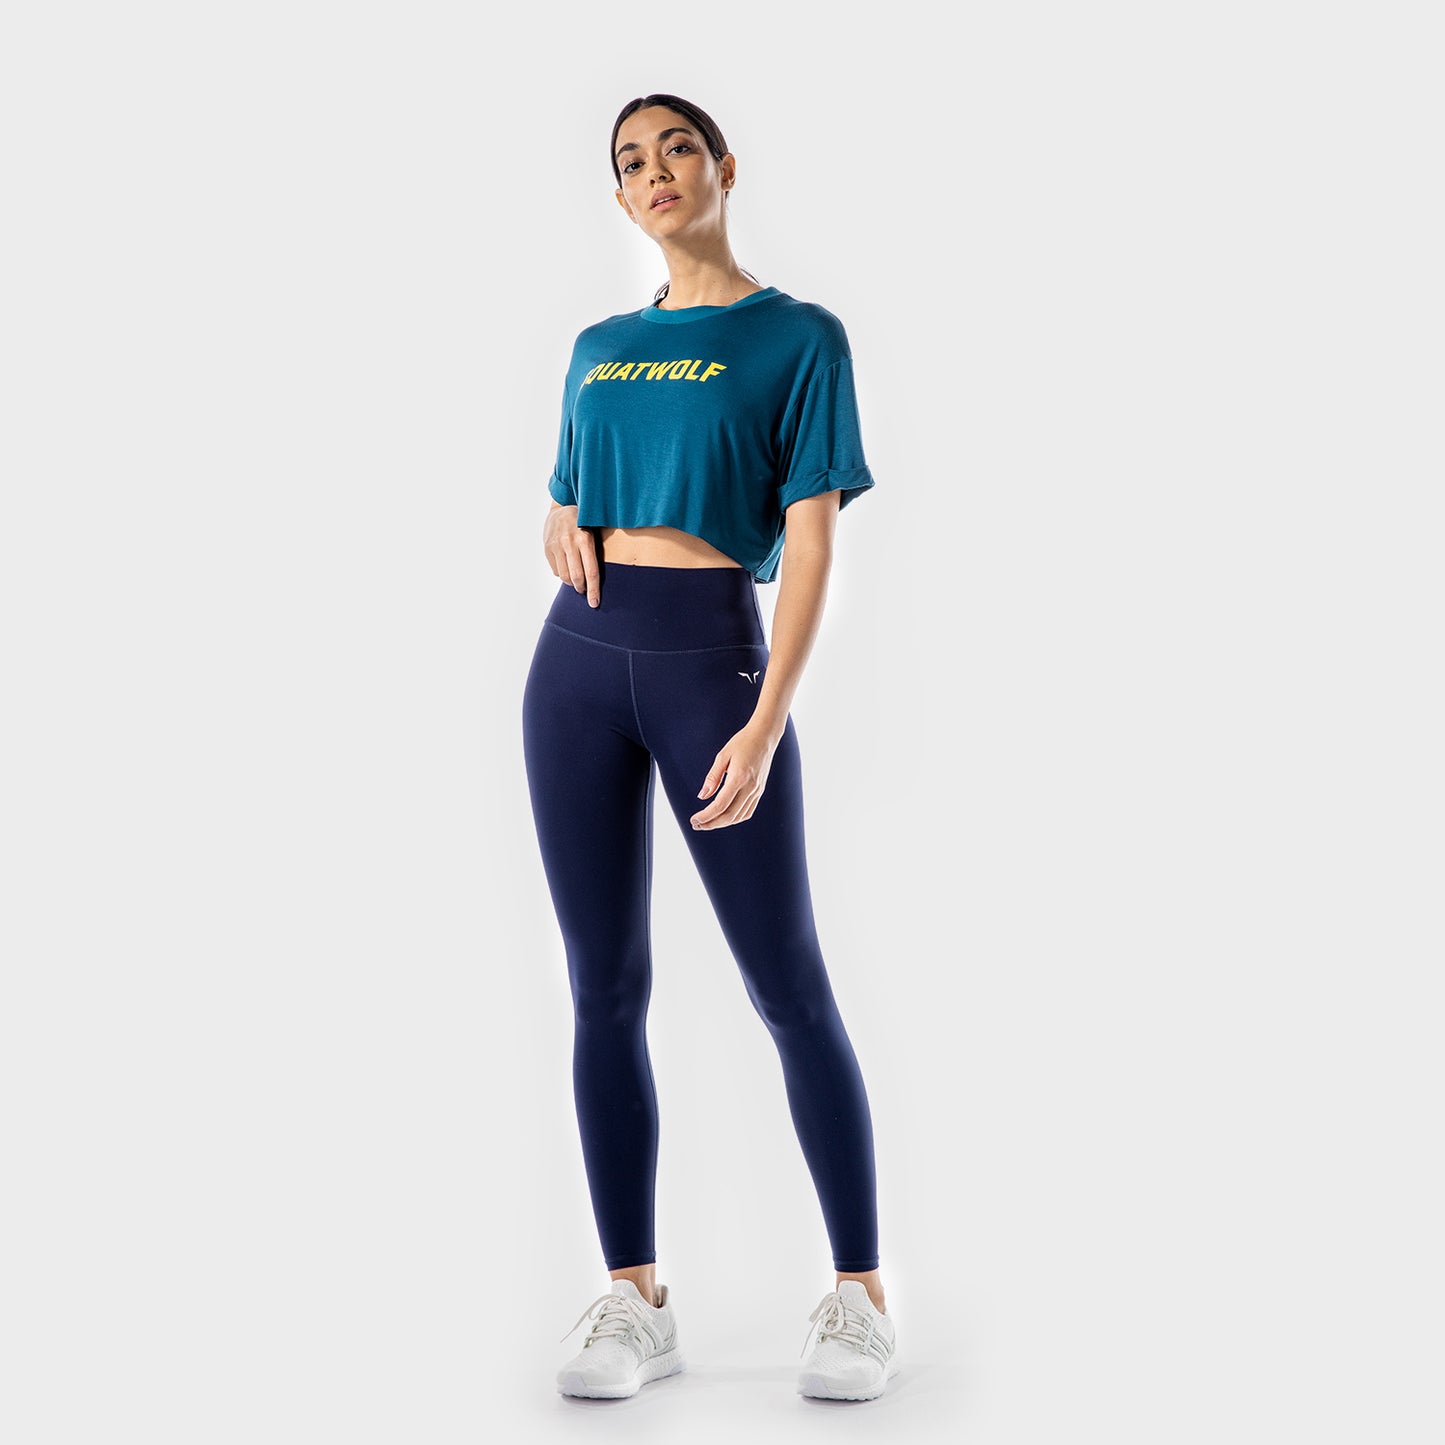 squatwolf-gym-t-shirts-for-women-iconic-crop-tee-teal-workout-clothes